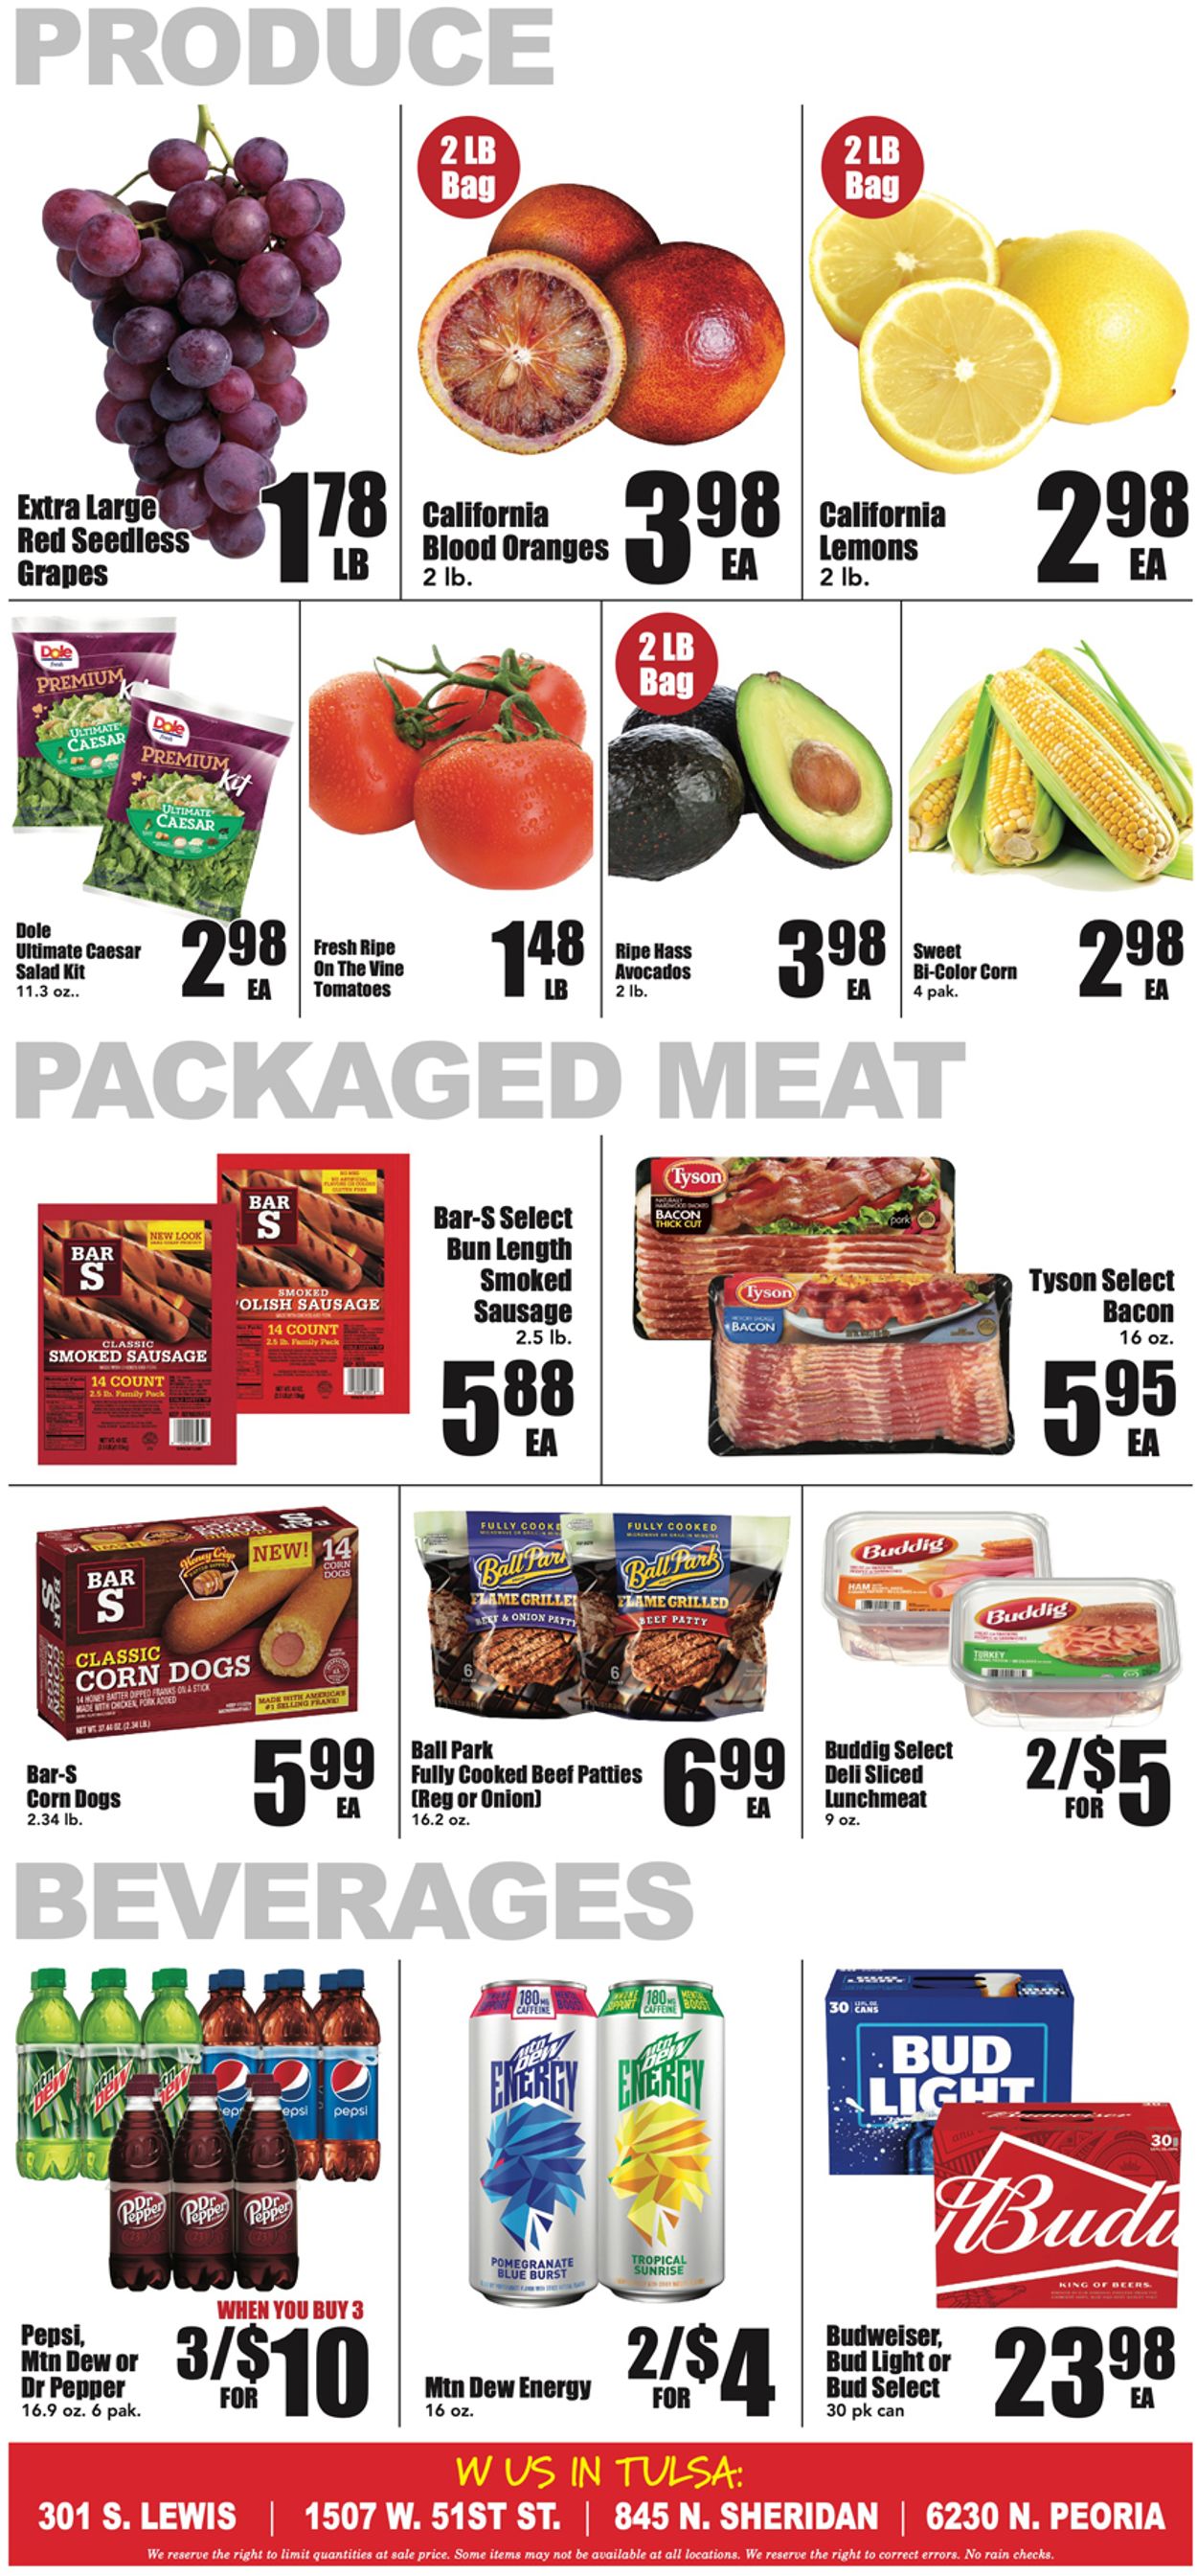 Warehouse Market Ad from 04/27/2022